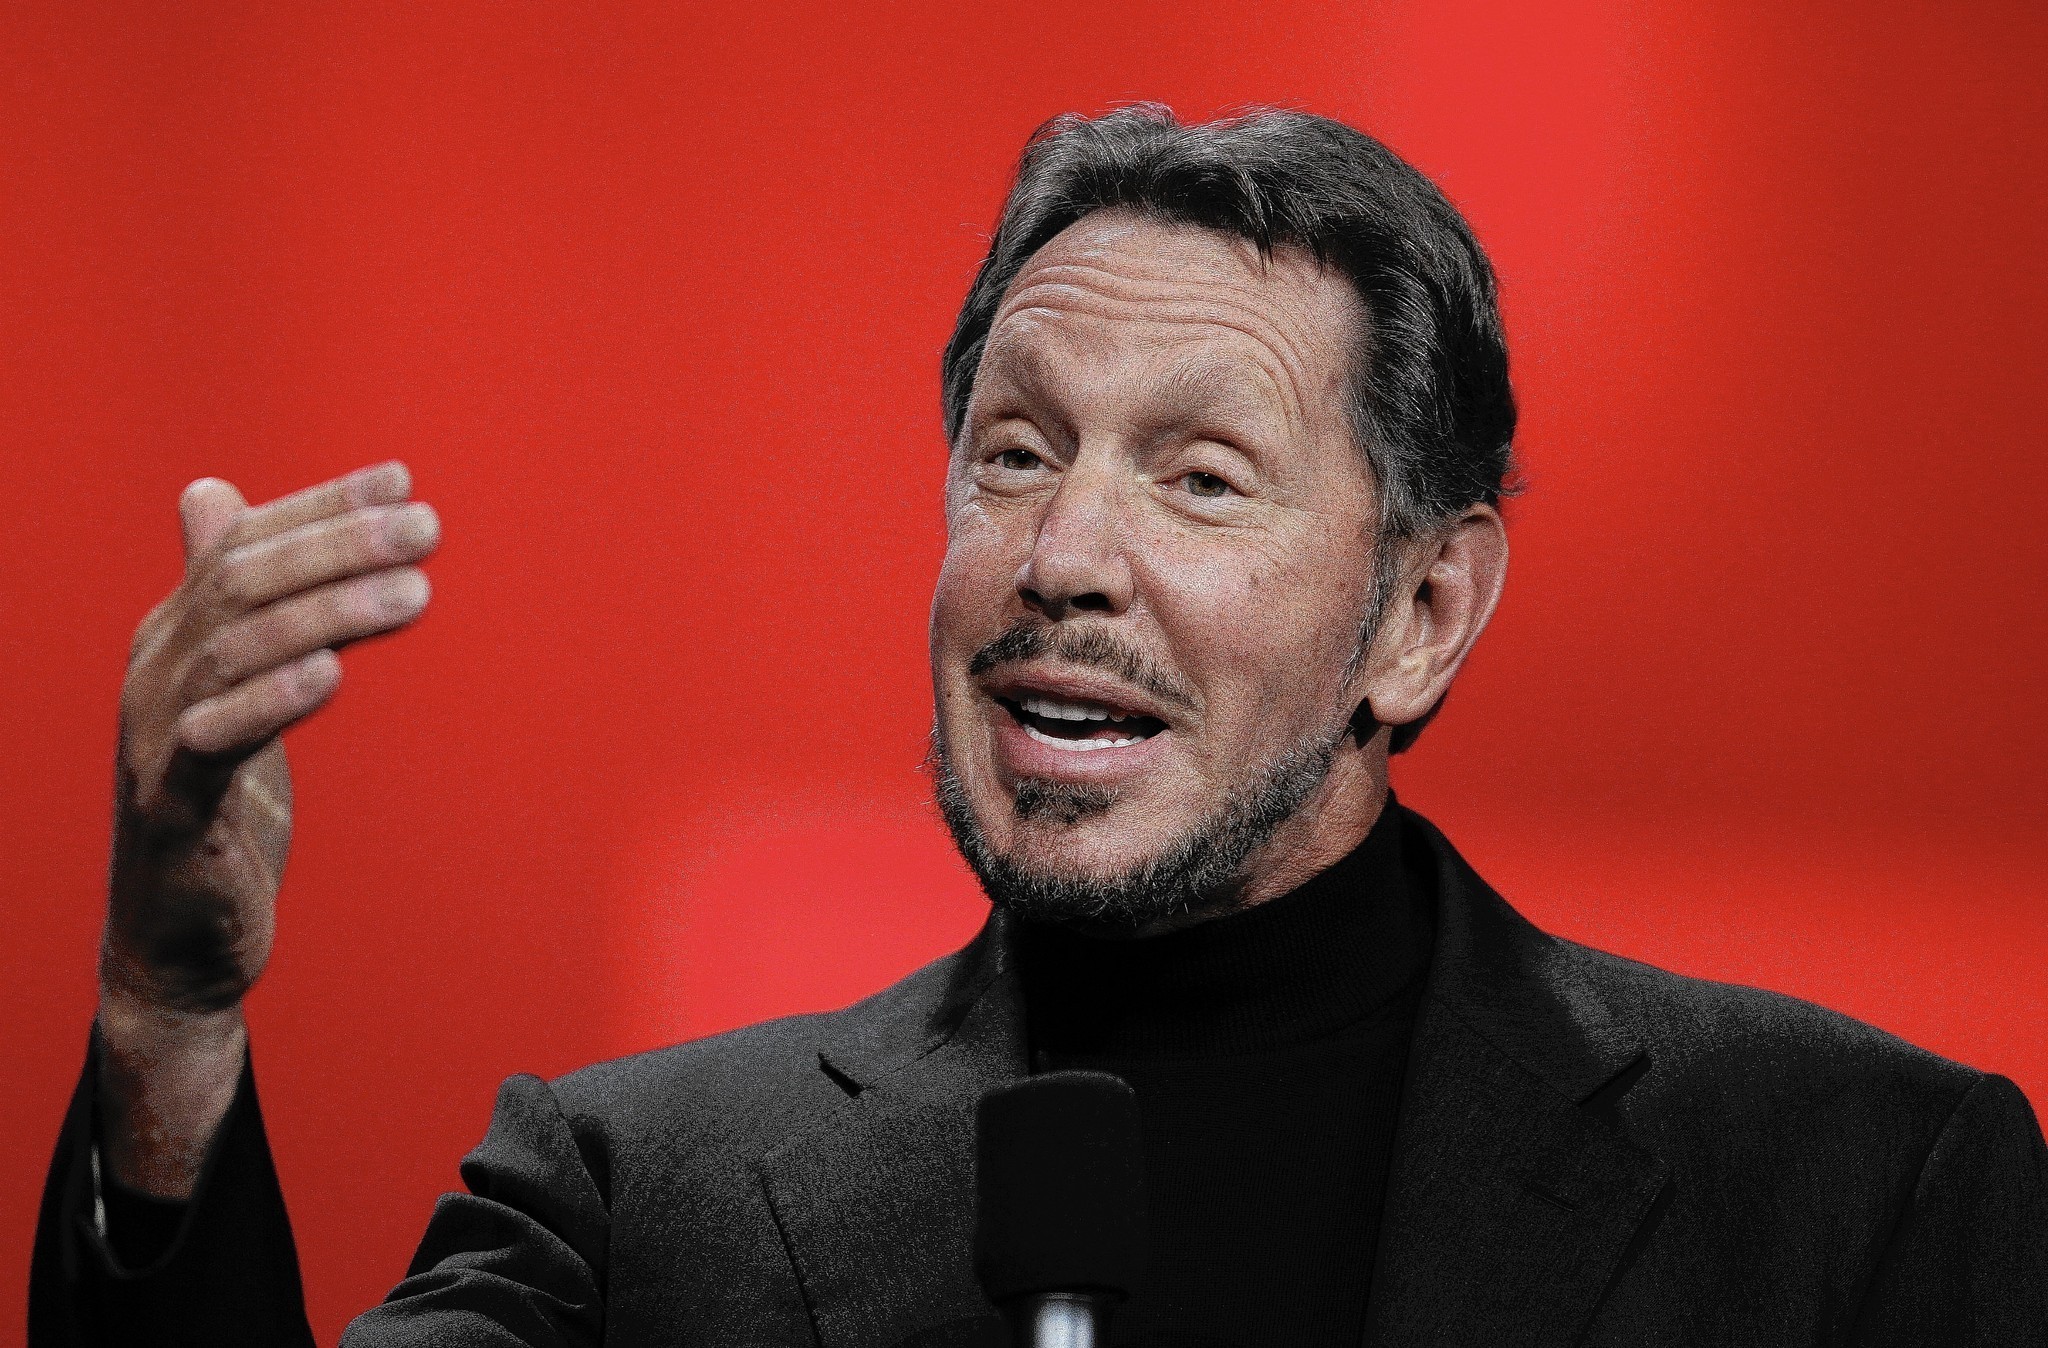 During Larry Ellison’s divorce shortly after founding Oracle, his wife forfeited her claim to the company in exchange for $500. Ellison is worth about $50,000,000,000 today.